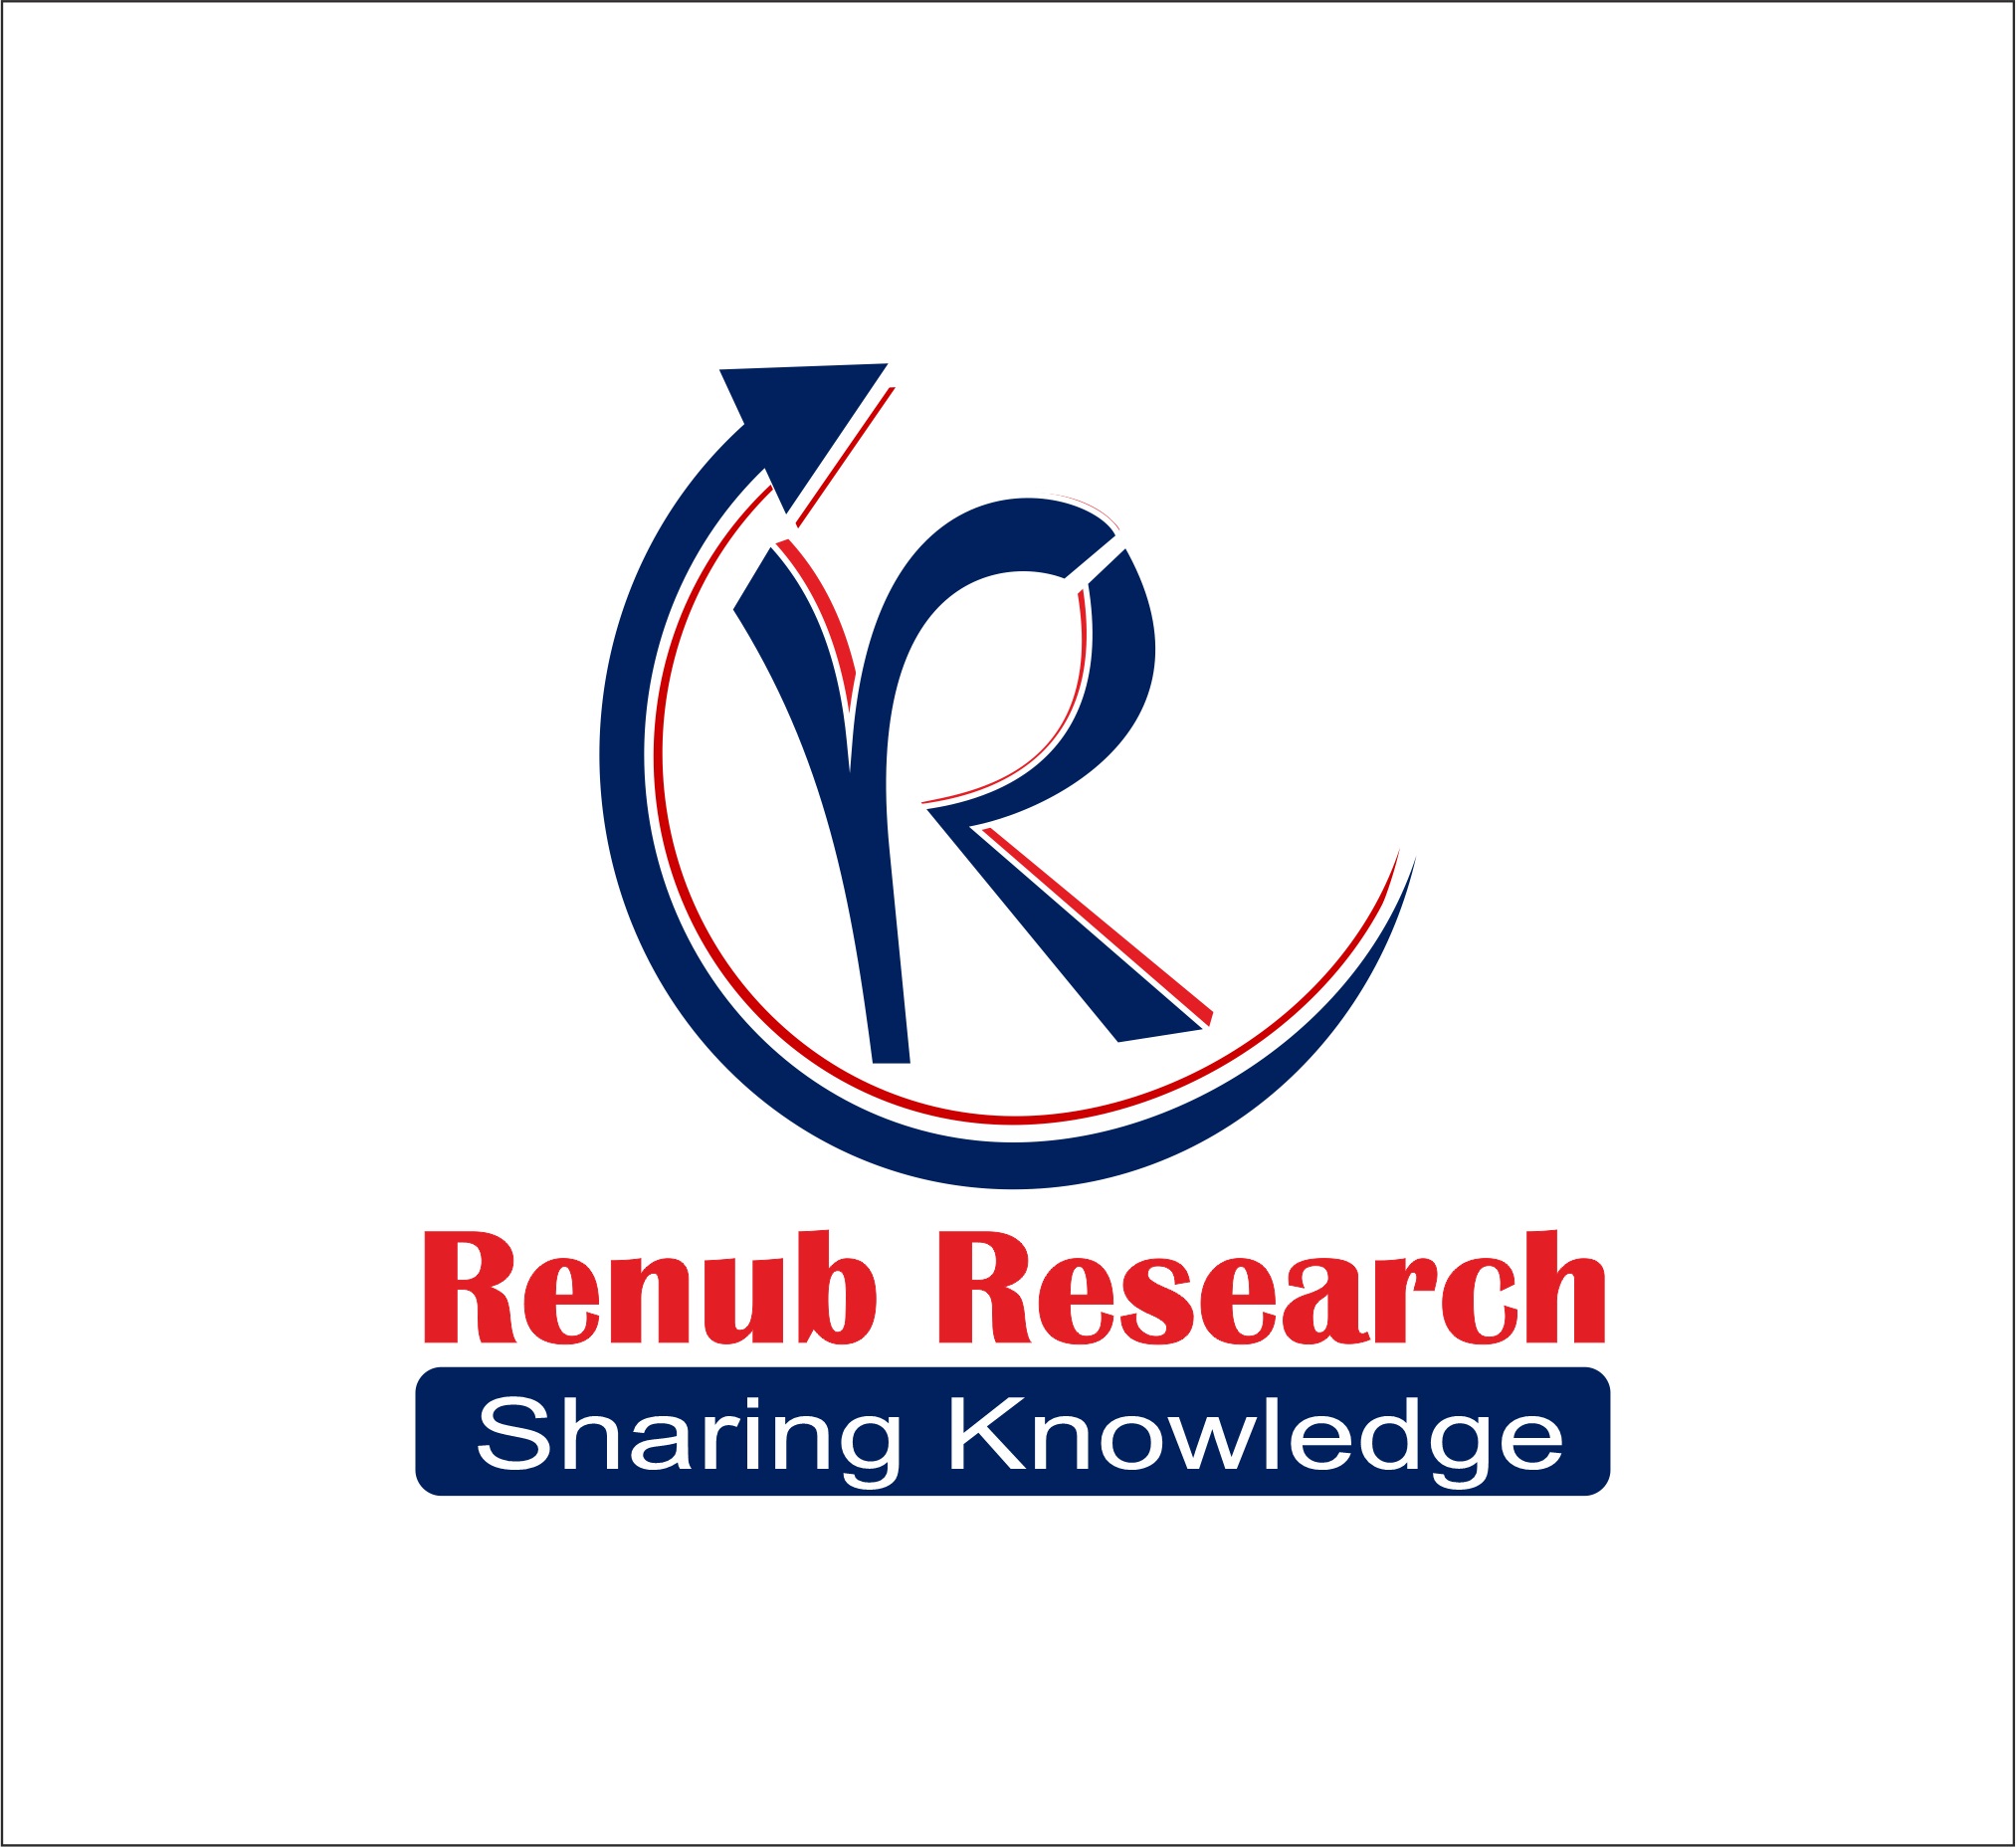 Japan Hotel Market is expected to be 26.8 Billion by the end of the year 2025 - Renub Research